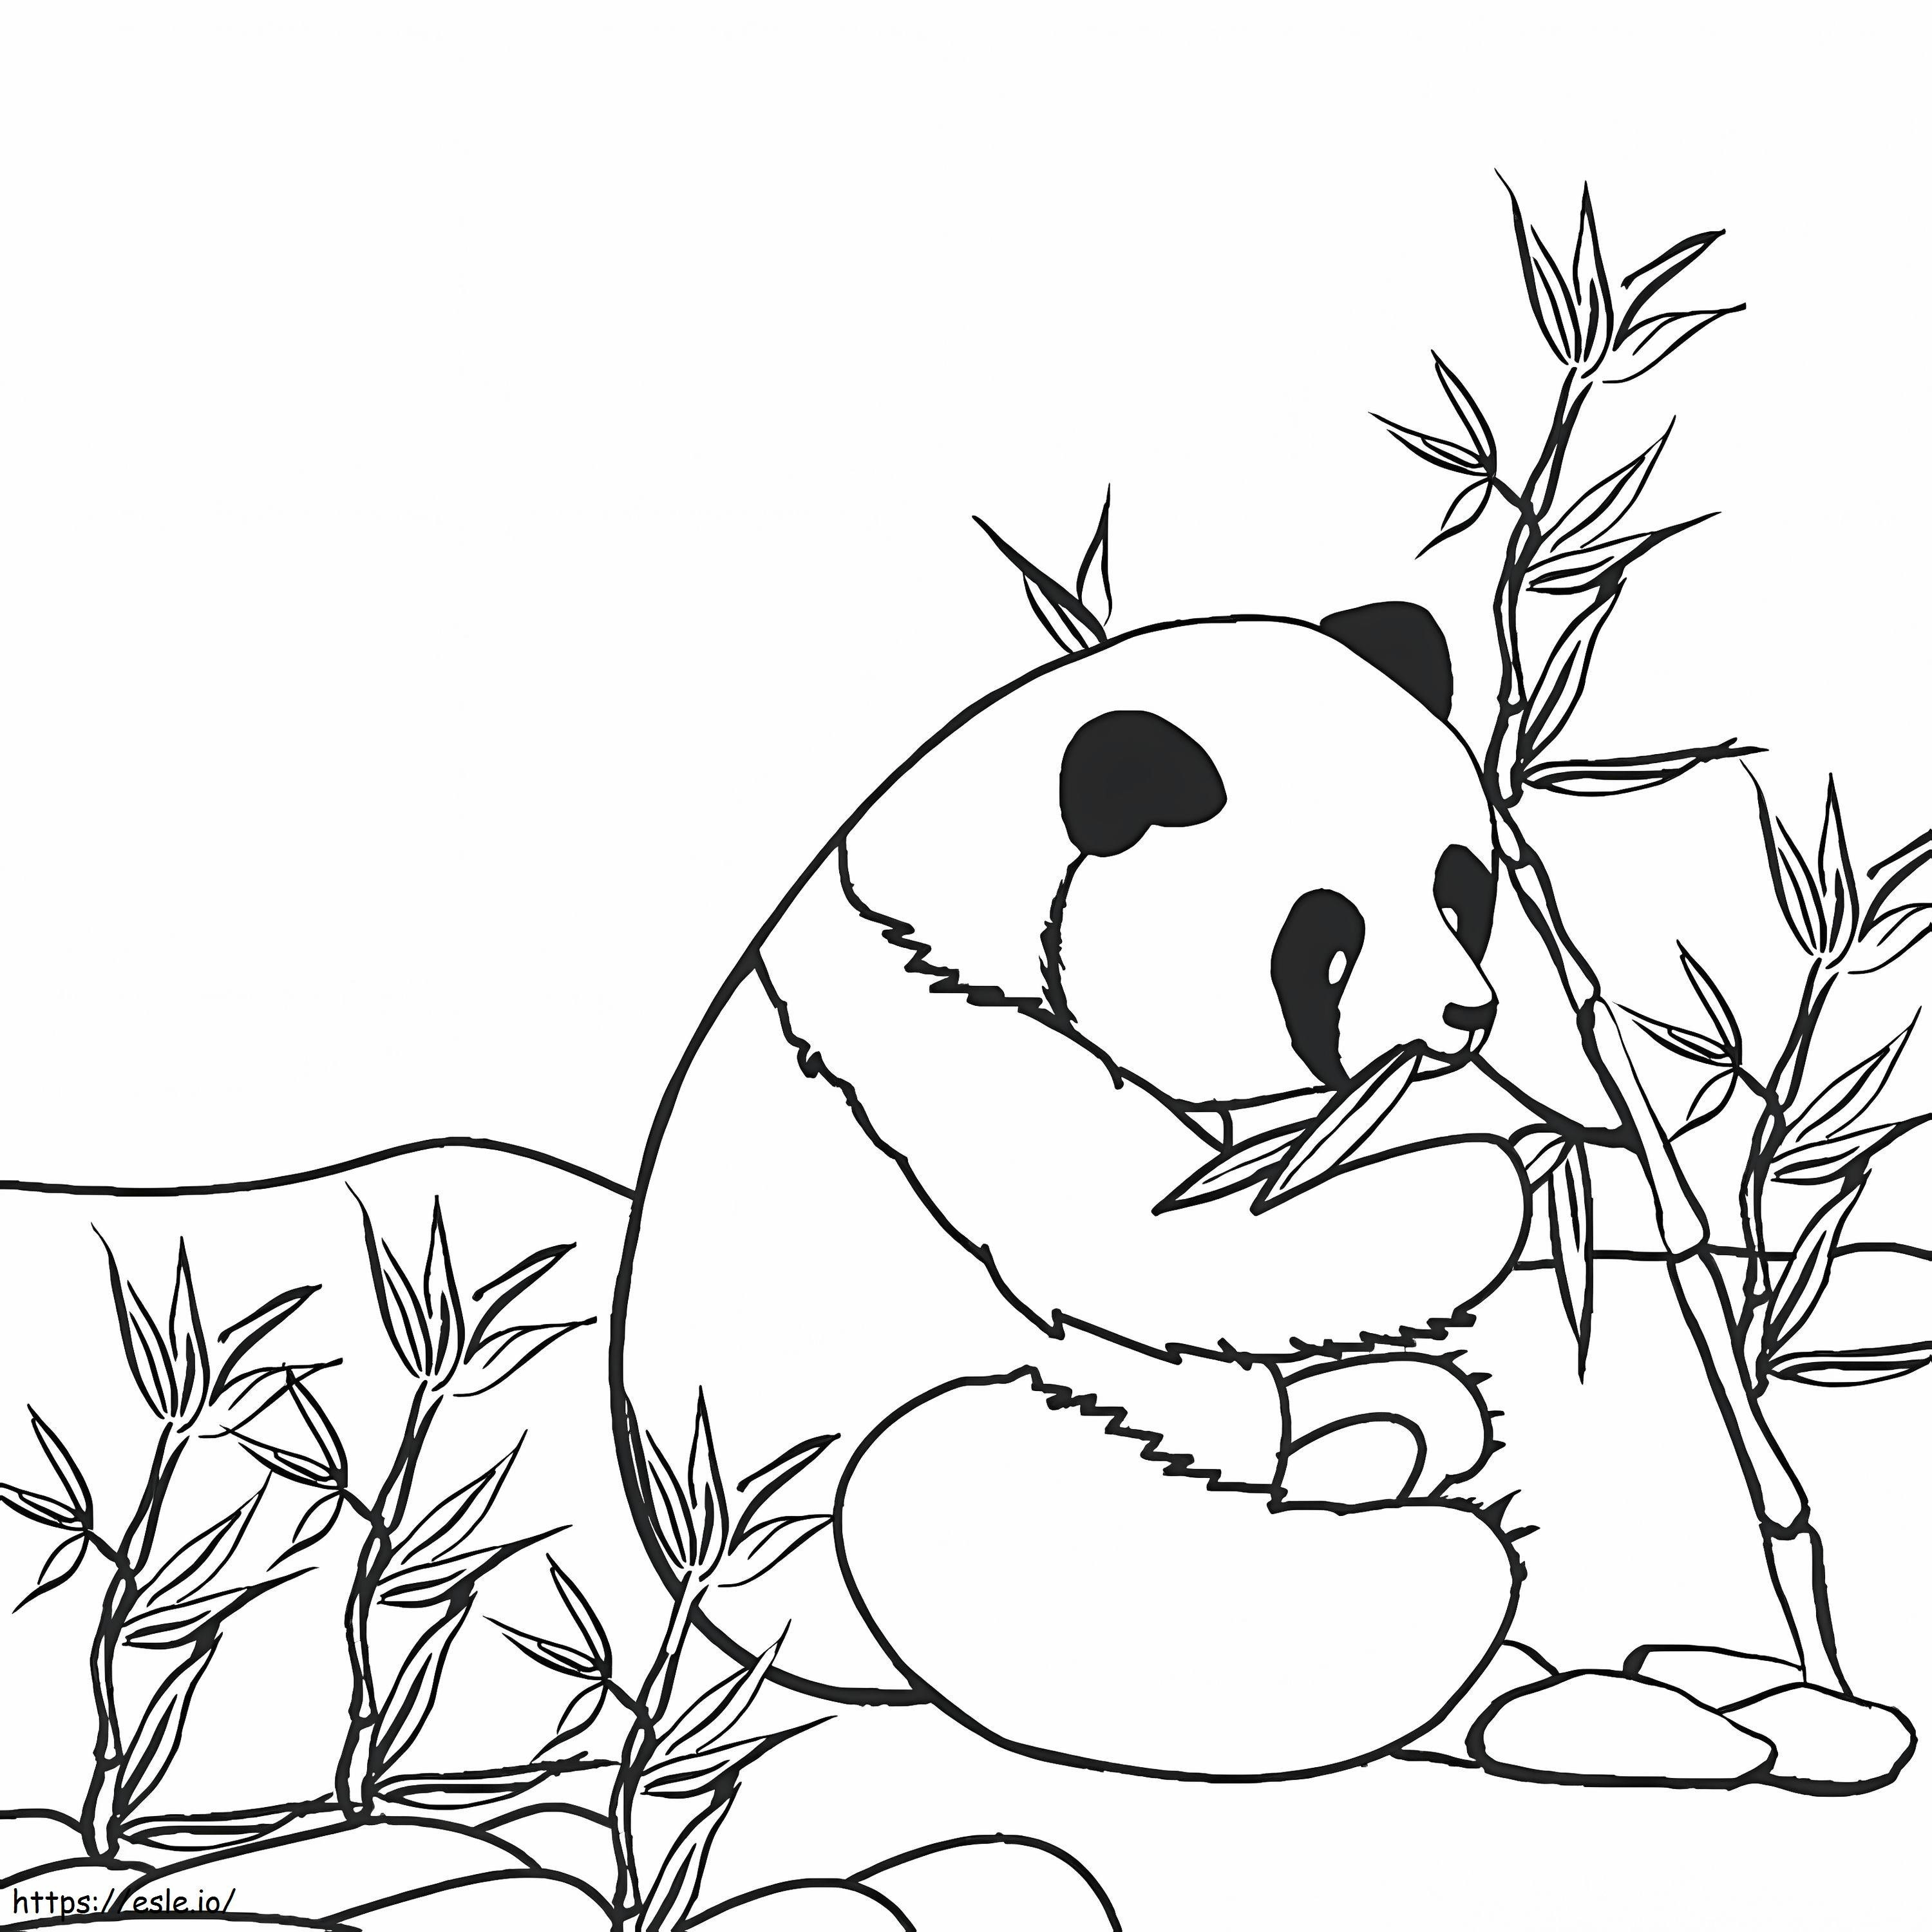 Panda Is Eating Bamboo coloring page